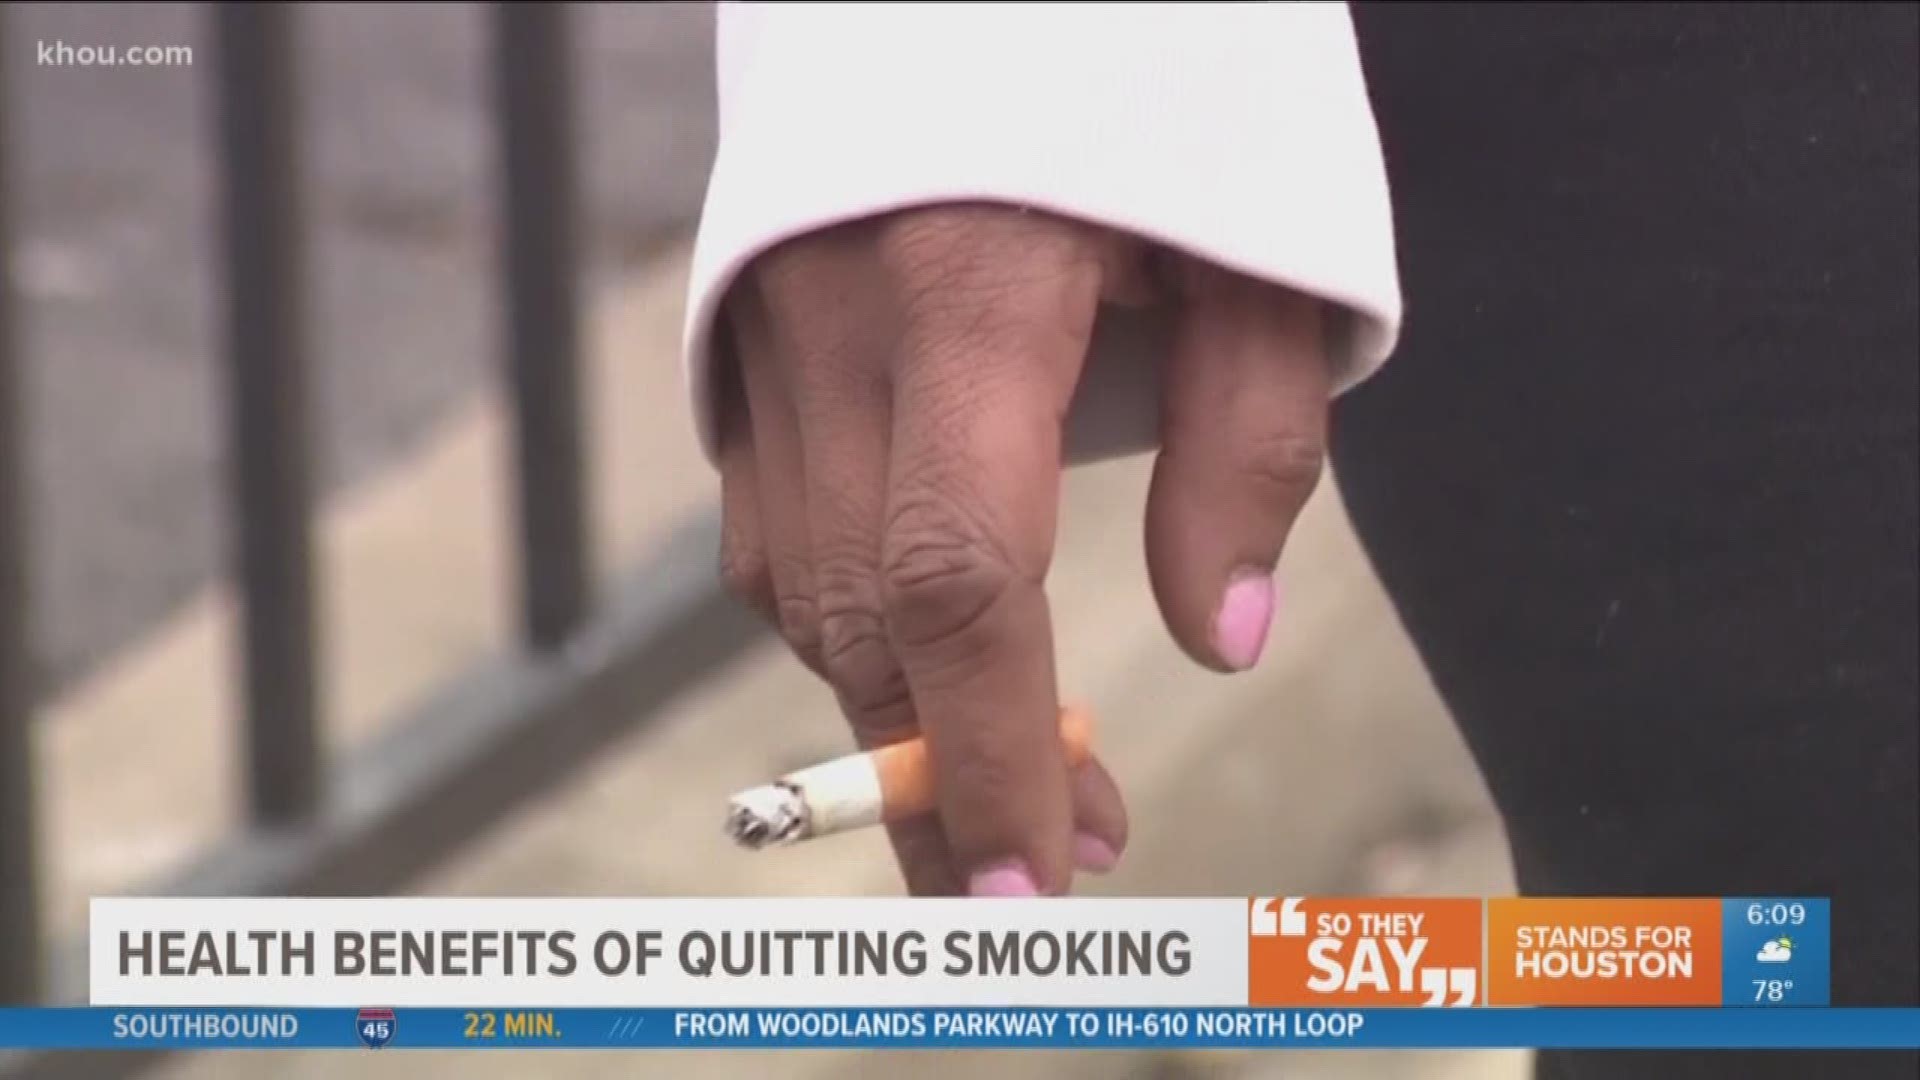 Researchers: it's OK to gain weight if you quit smoking